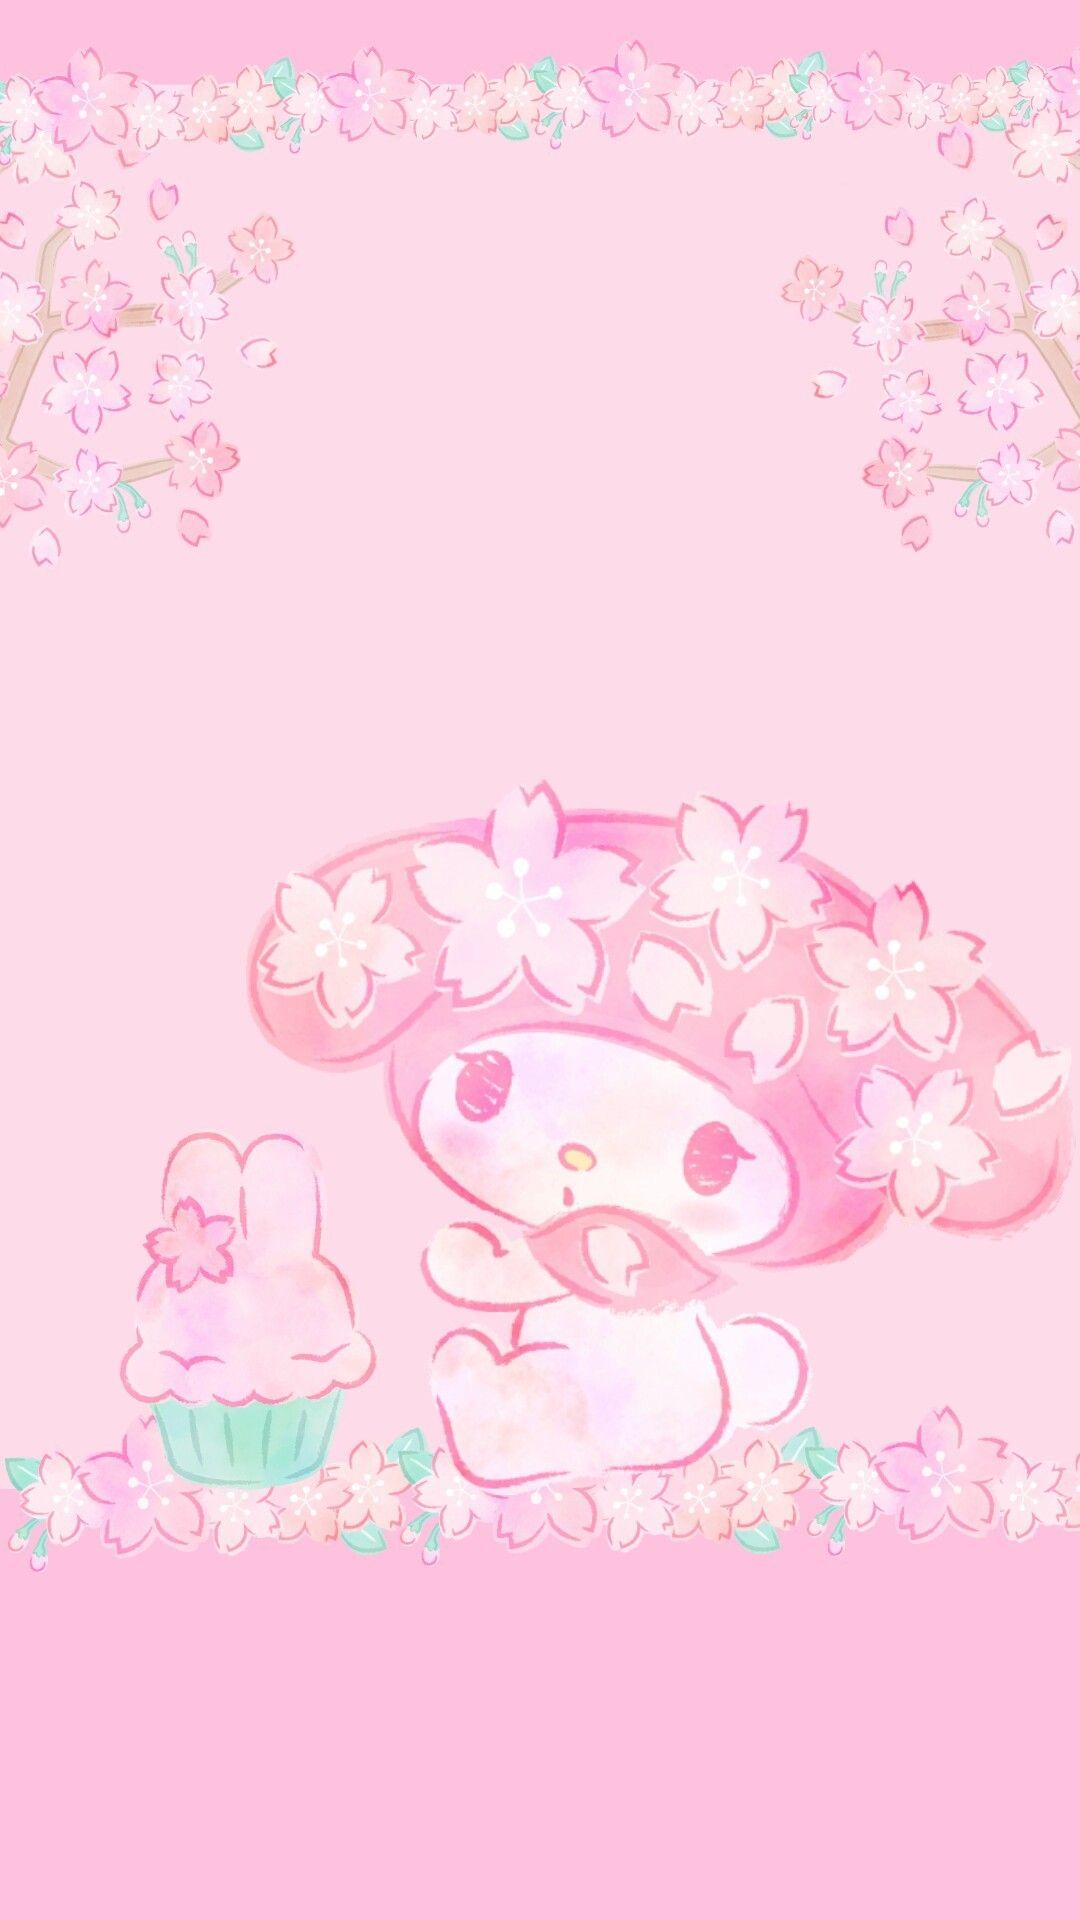  Be Positive   MY MELODY WALLPAPERS